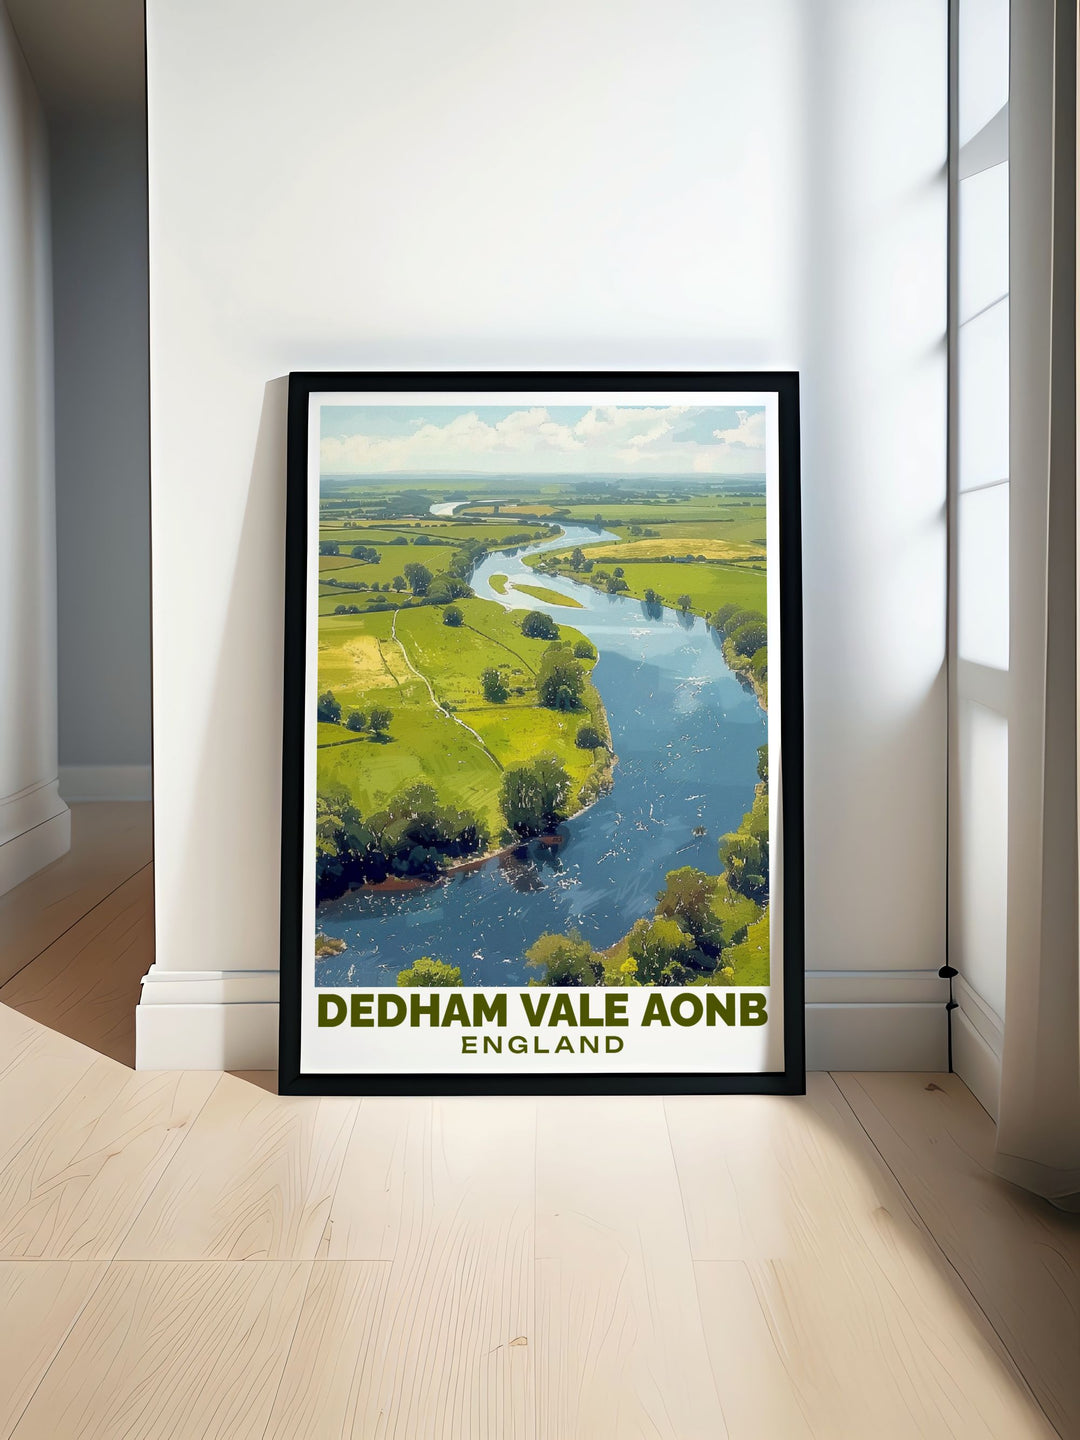 Home decor print illustrating the scenic beauty of the Natural Beauty Terrain in Dedham Vale, highlighting the lush meadows and serene riverbanks of Englands countryside.